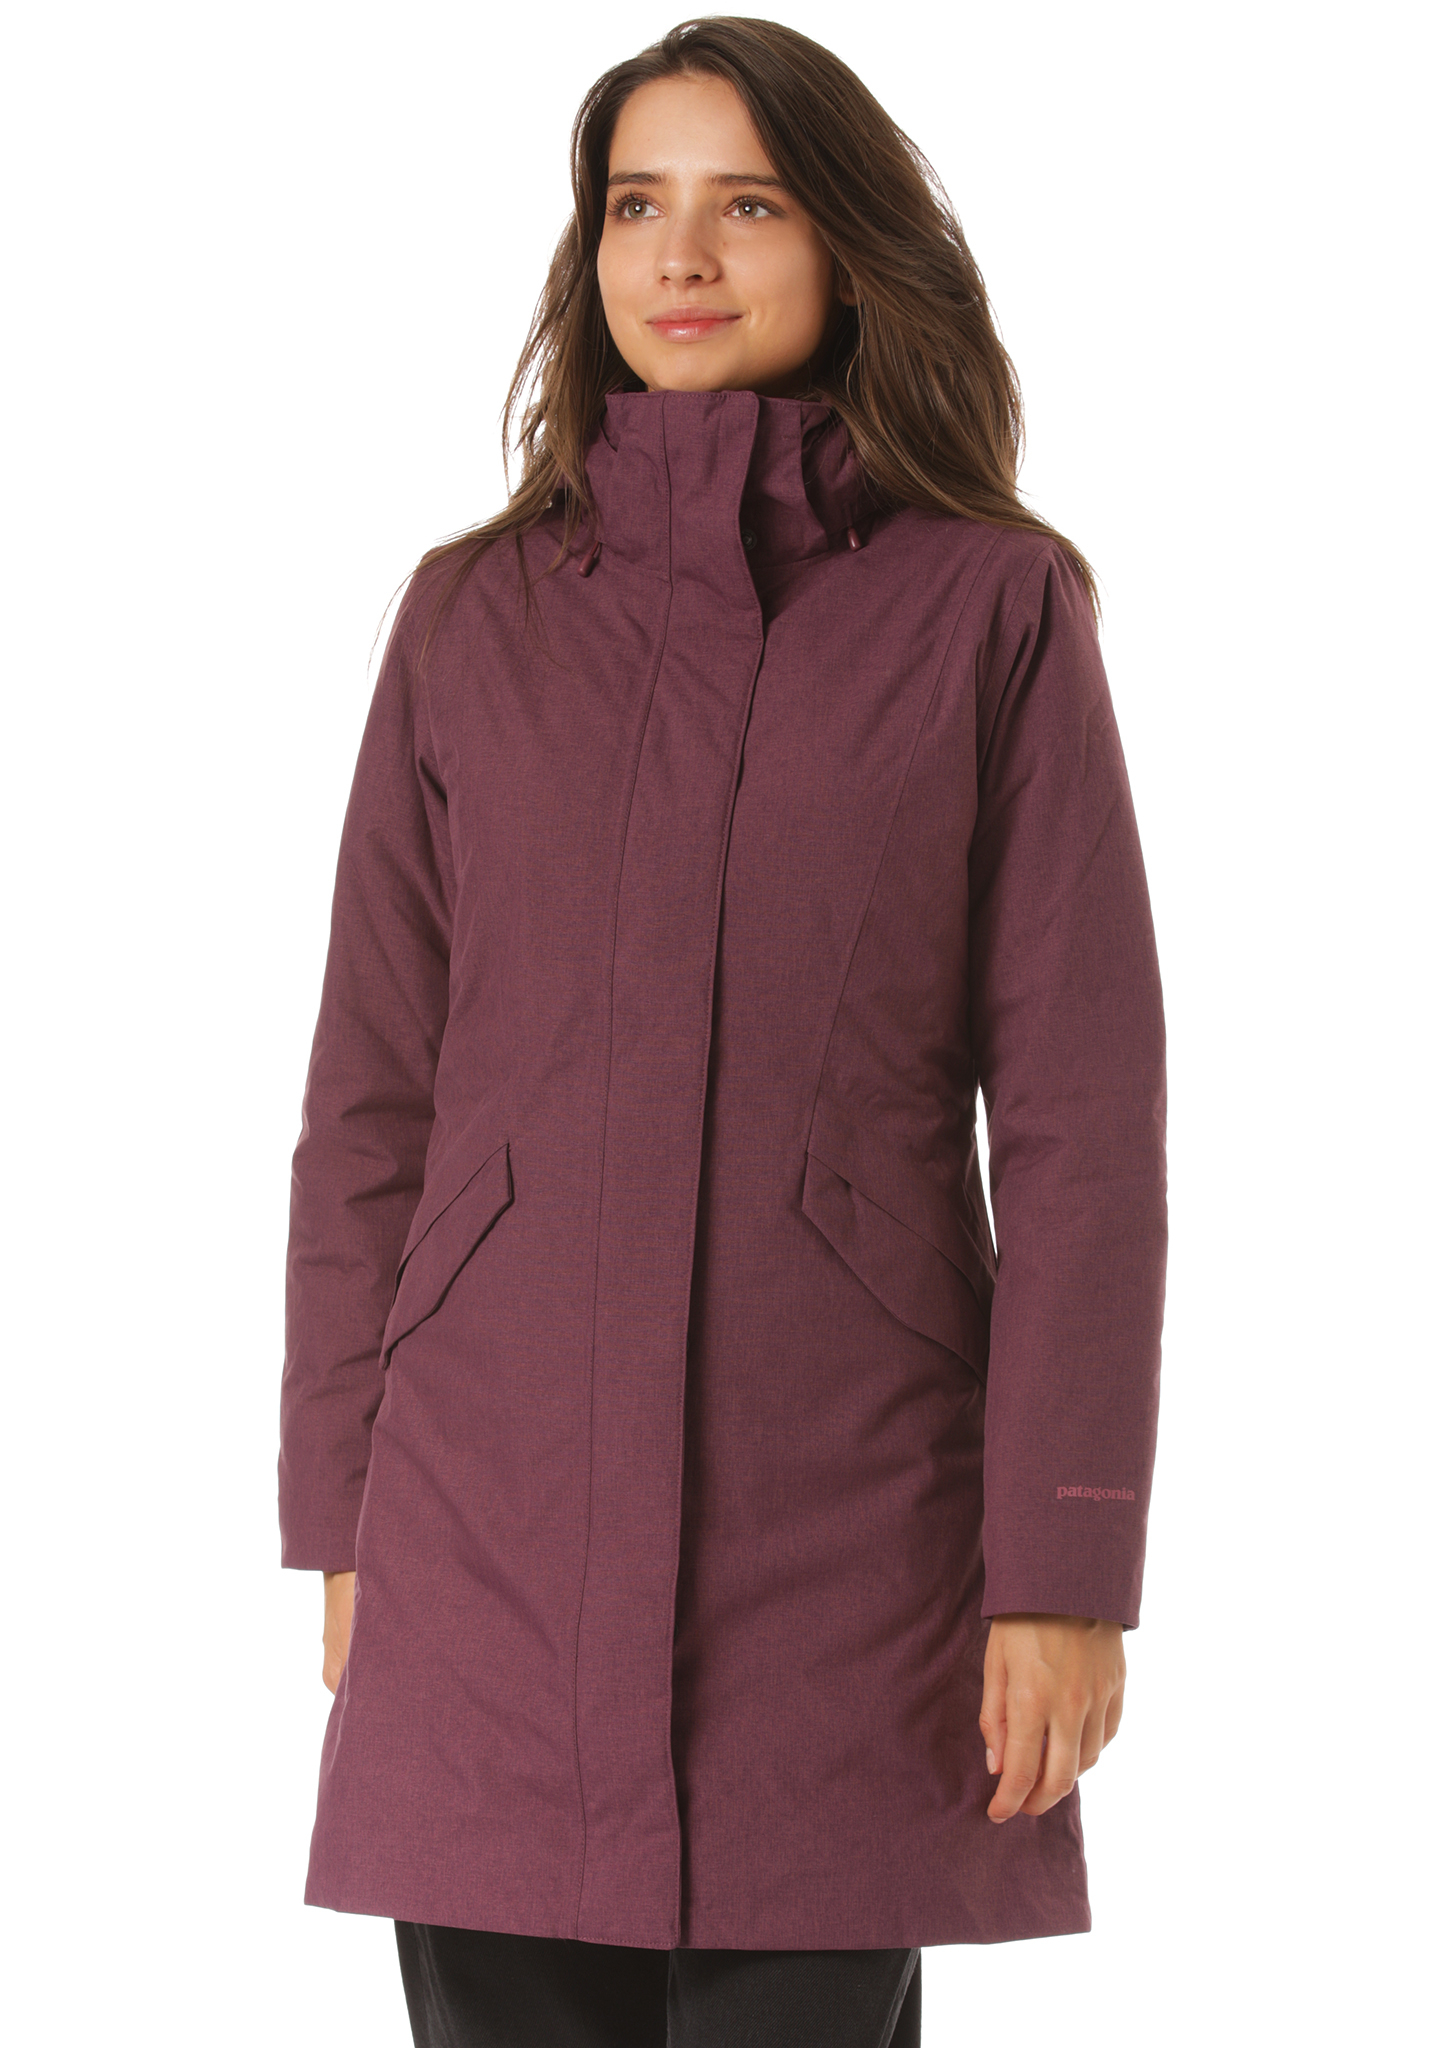 Patagonia Vosque 3-in-1 Parka light balsamic XL